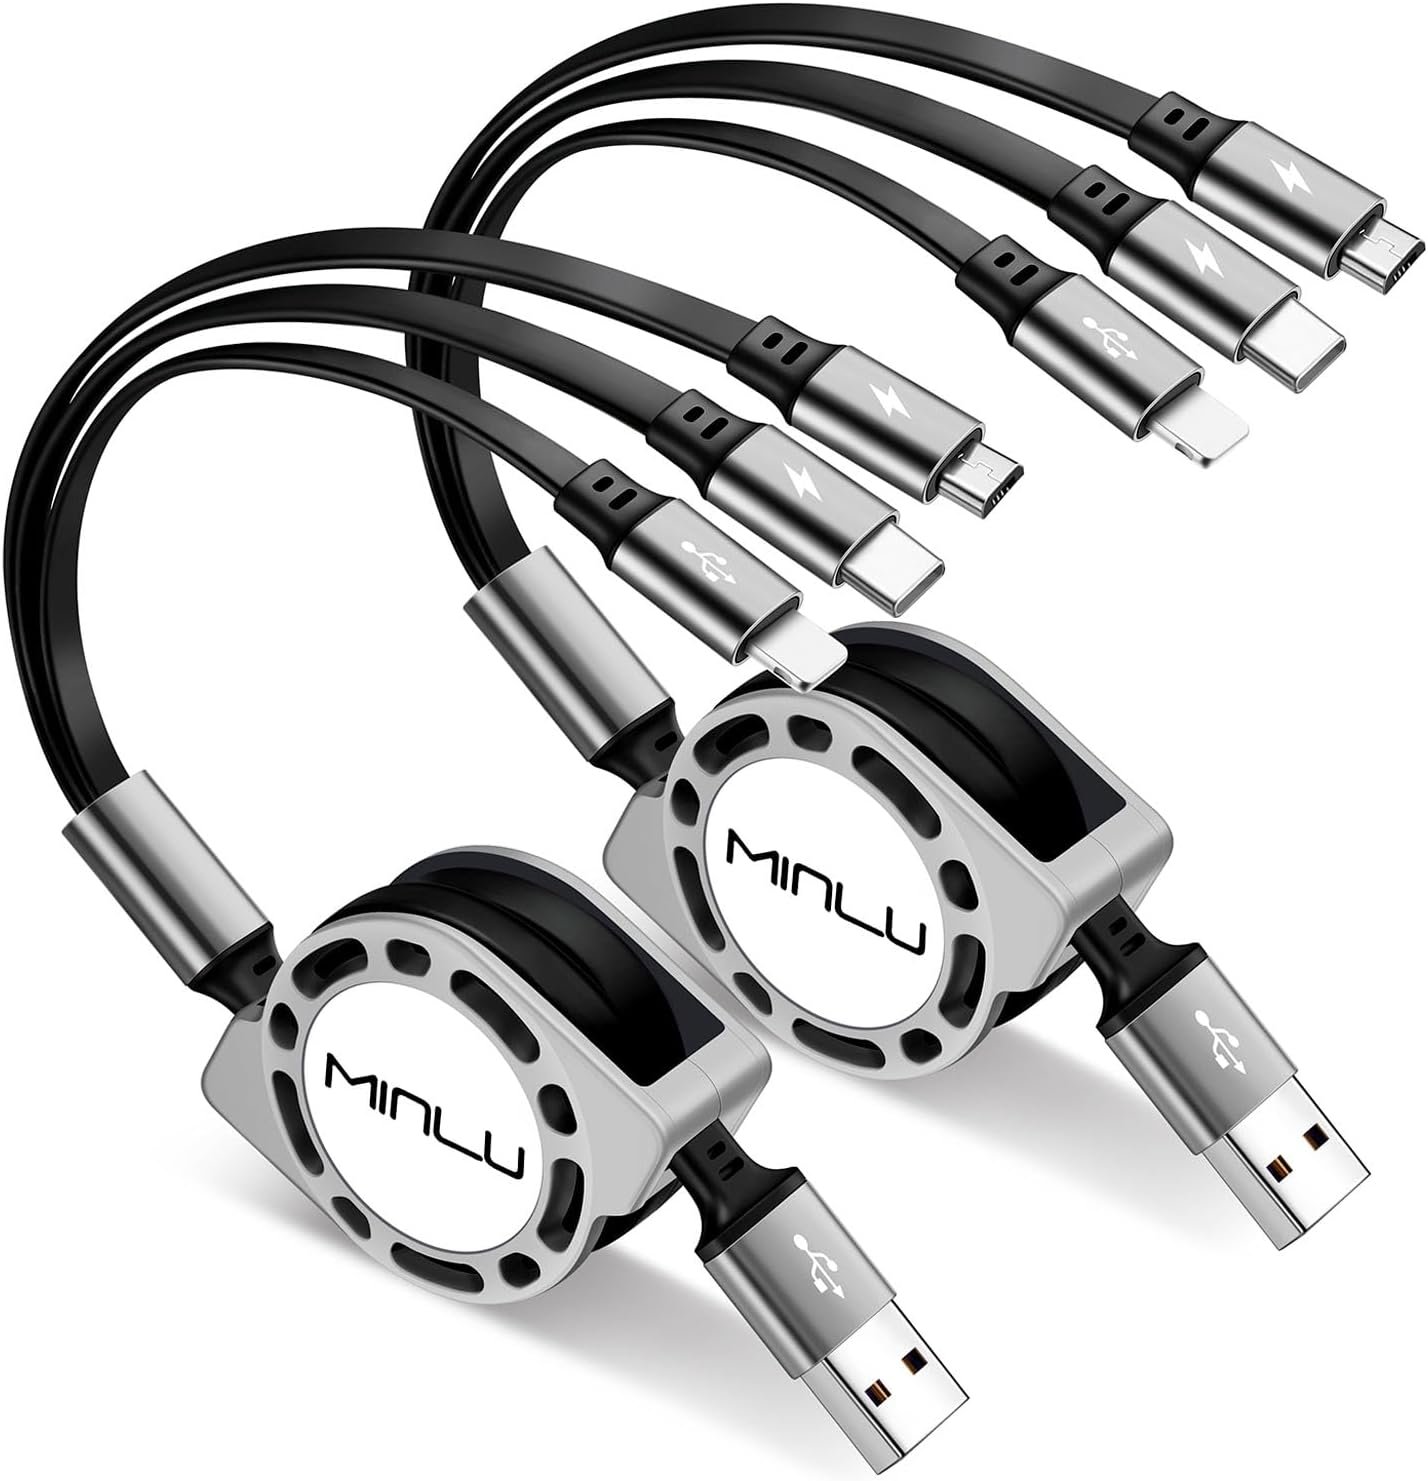 Minlu Multi Charging Cable 3A 2Pack 4ft 3 in 1 Retractable Multi USB Cable Fast Charger Cord Adapter: A Comprehensive Review